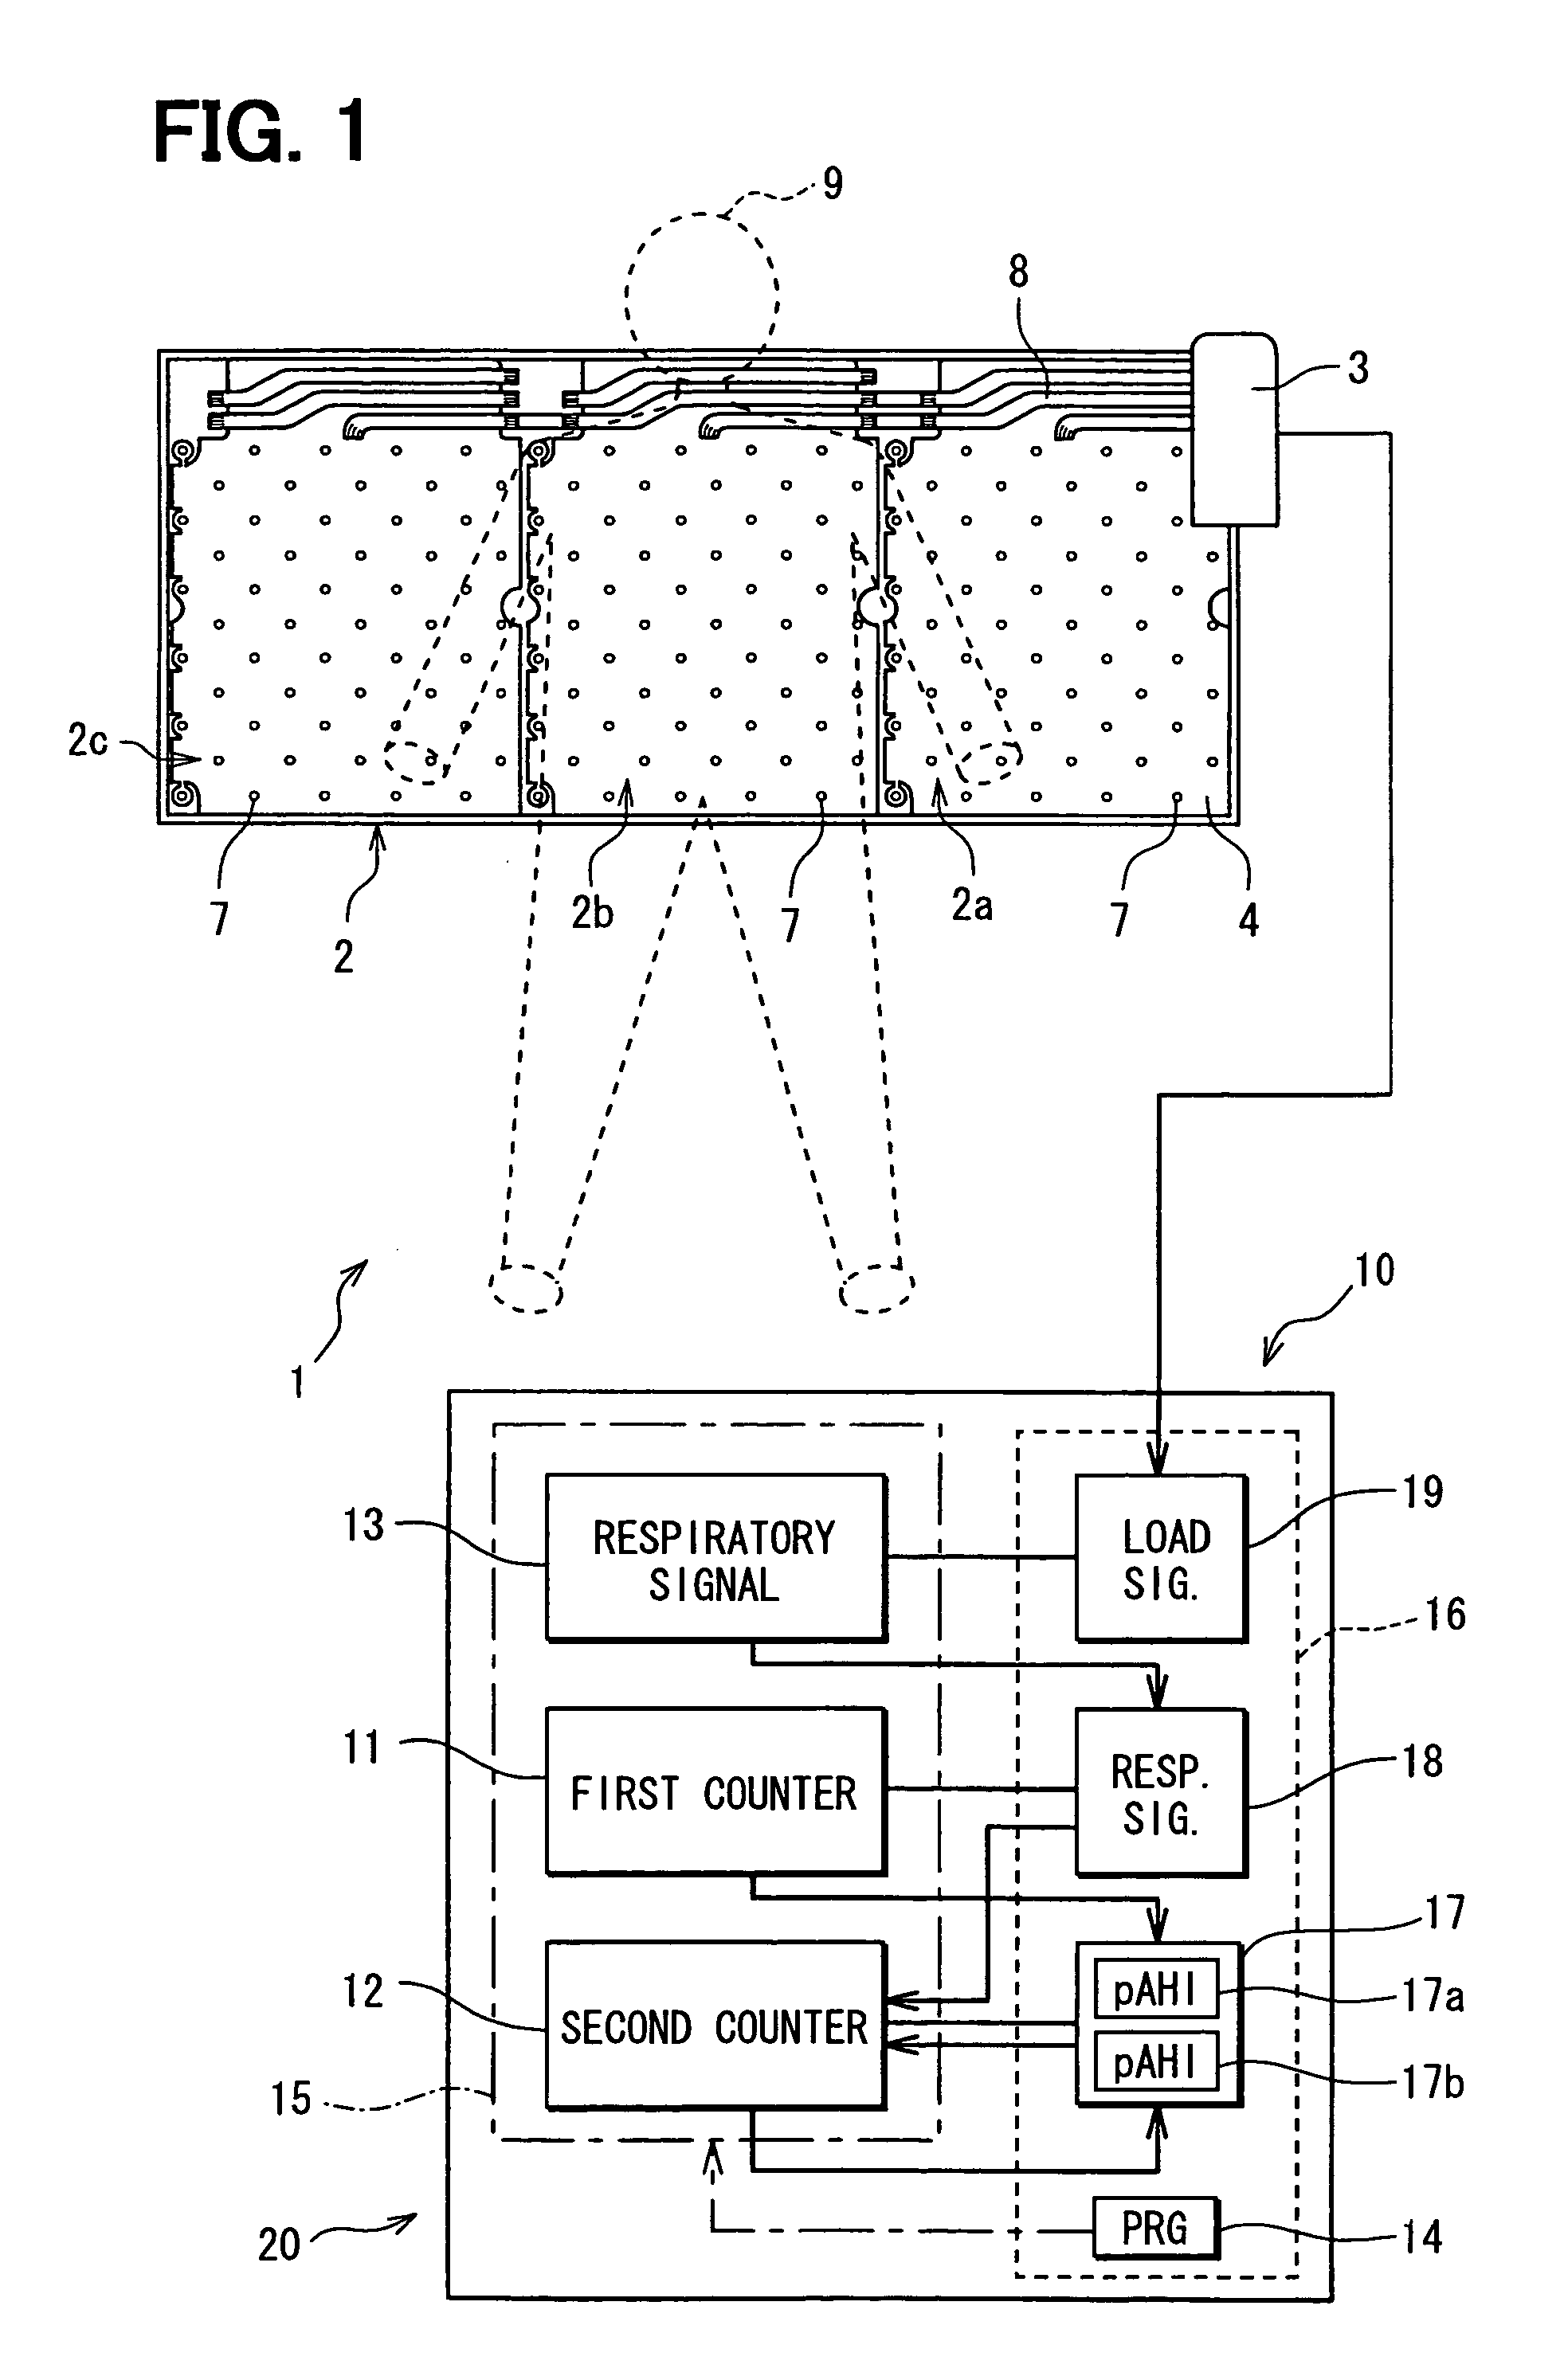 Method and apparatus of analyzing respiratory signals corresponding to changes in subject's loads applied to bed